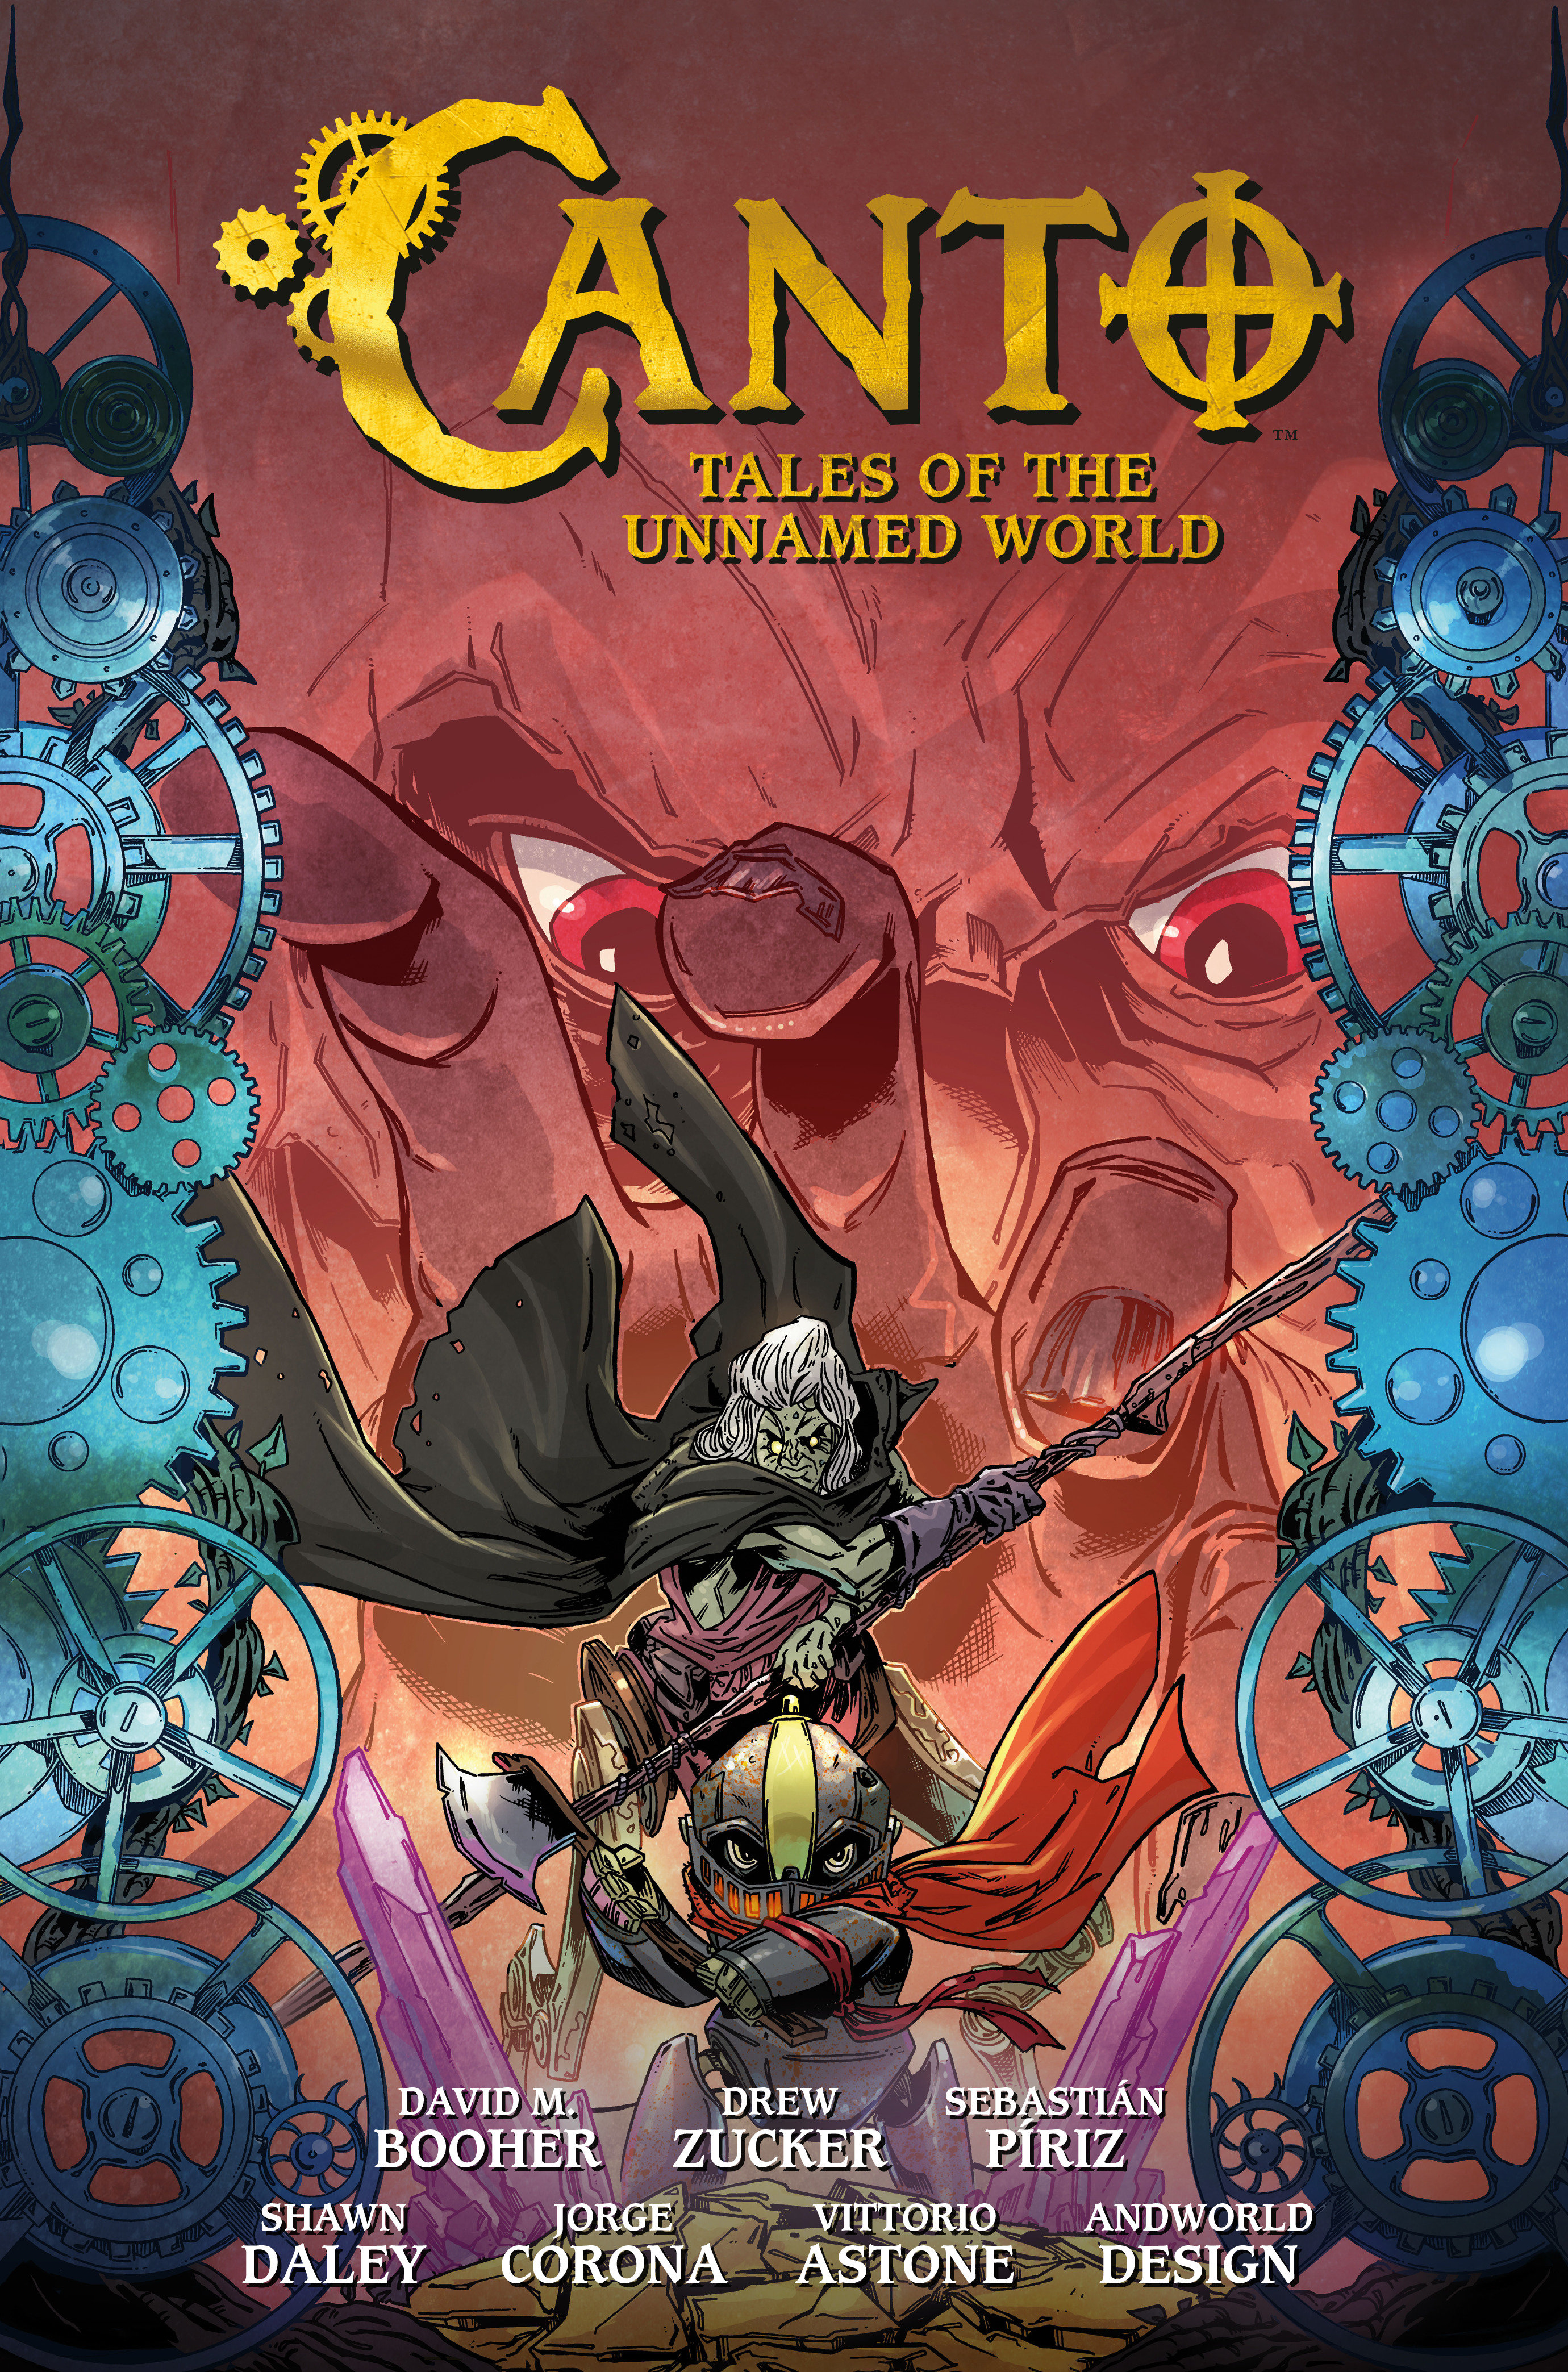 Canto Hardcover Volume 3 Tales Unnamed World (Canto and the City of Giants)